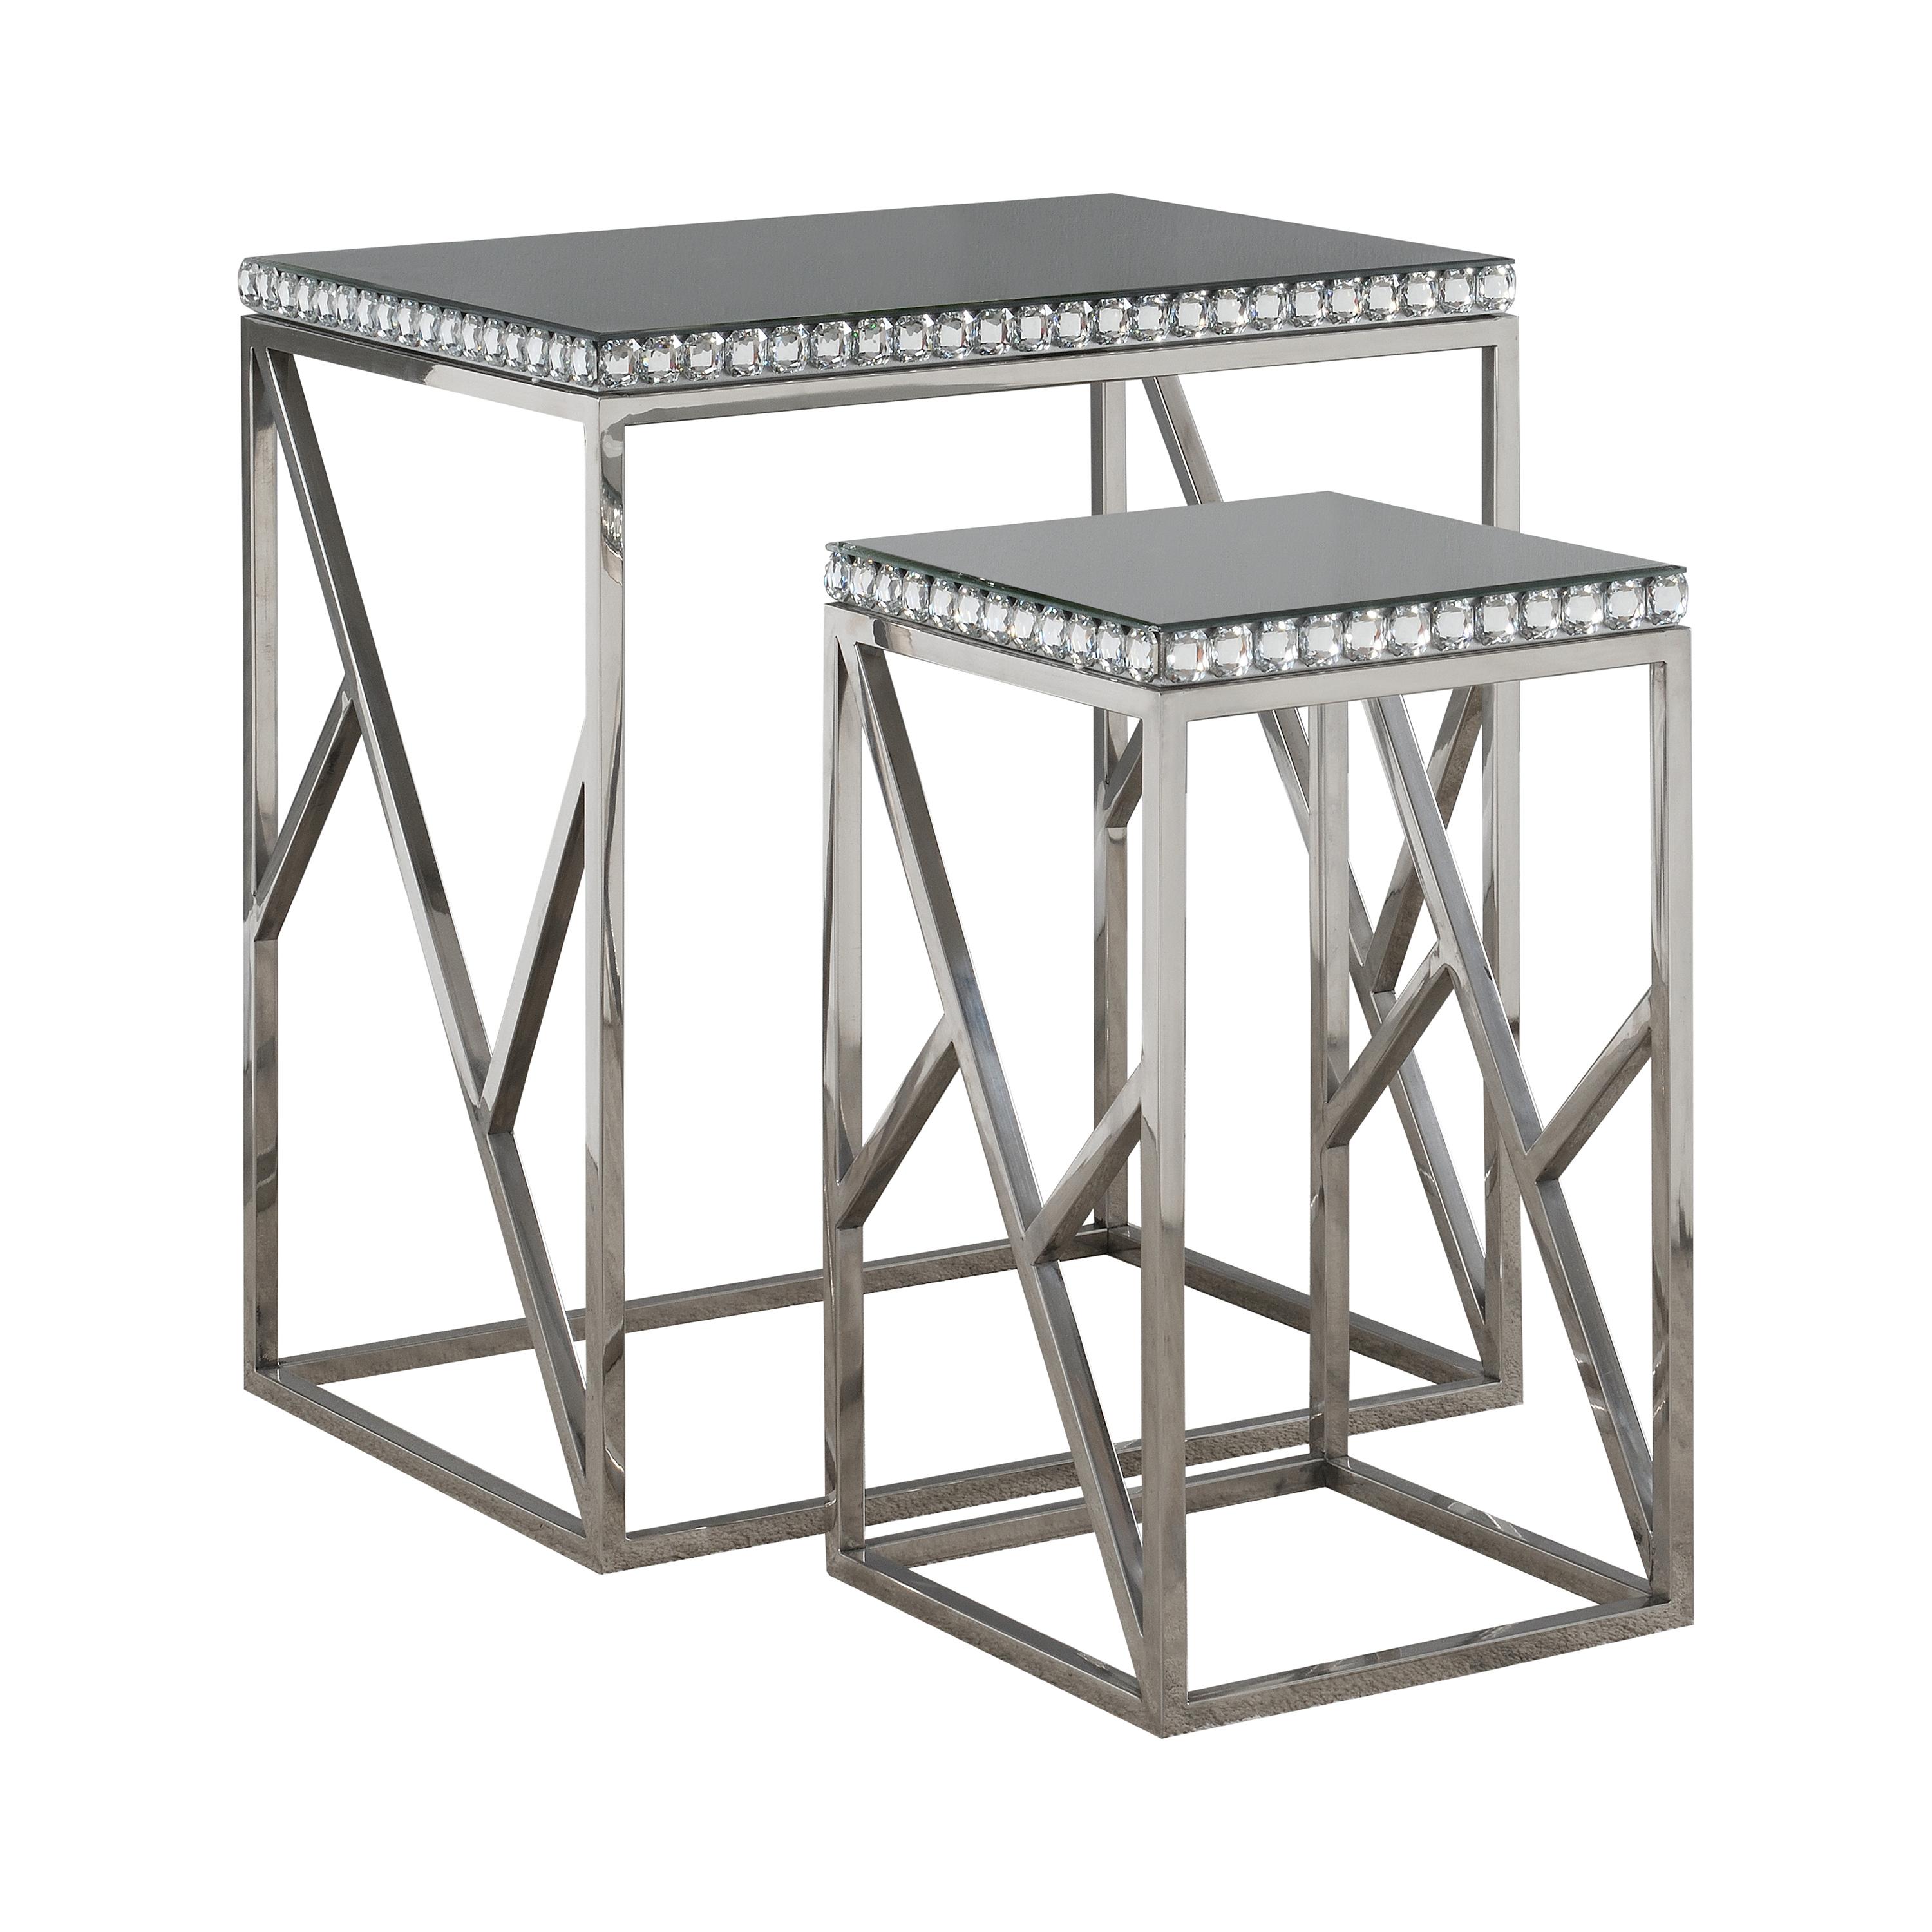 Contemporary Nesting Tables Set 930226 930226 in Silver 